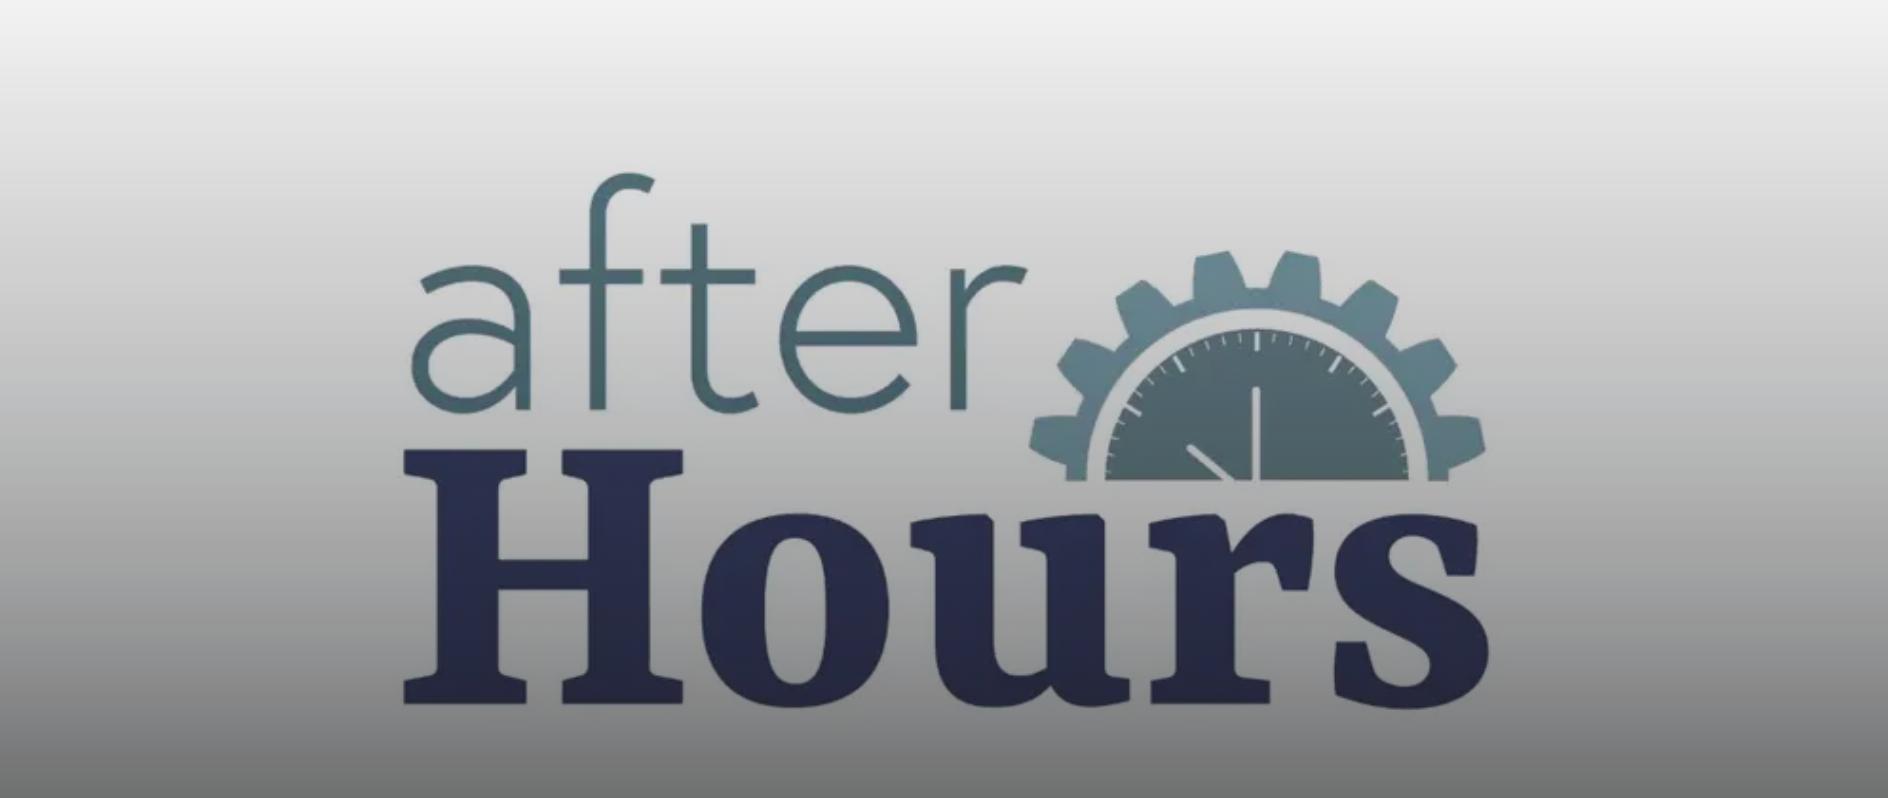 Tell us about your hobbies and activities for a chance to be featured in our After Hours video series.